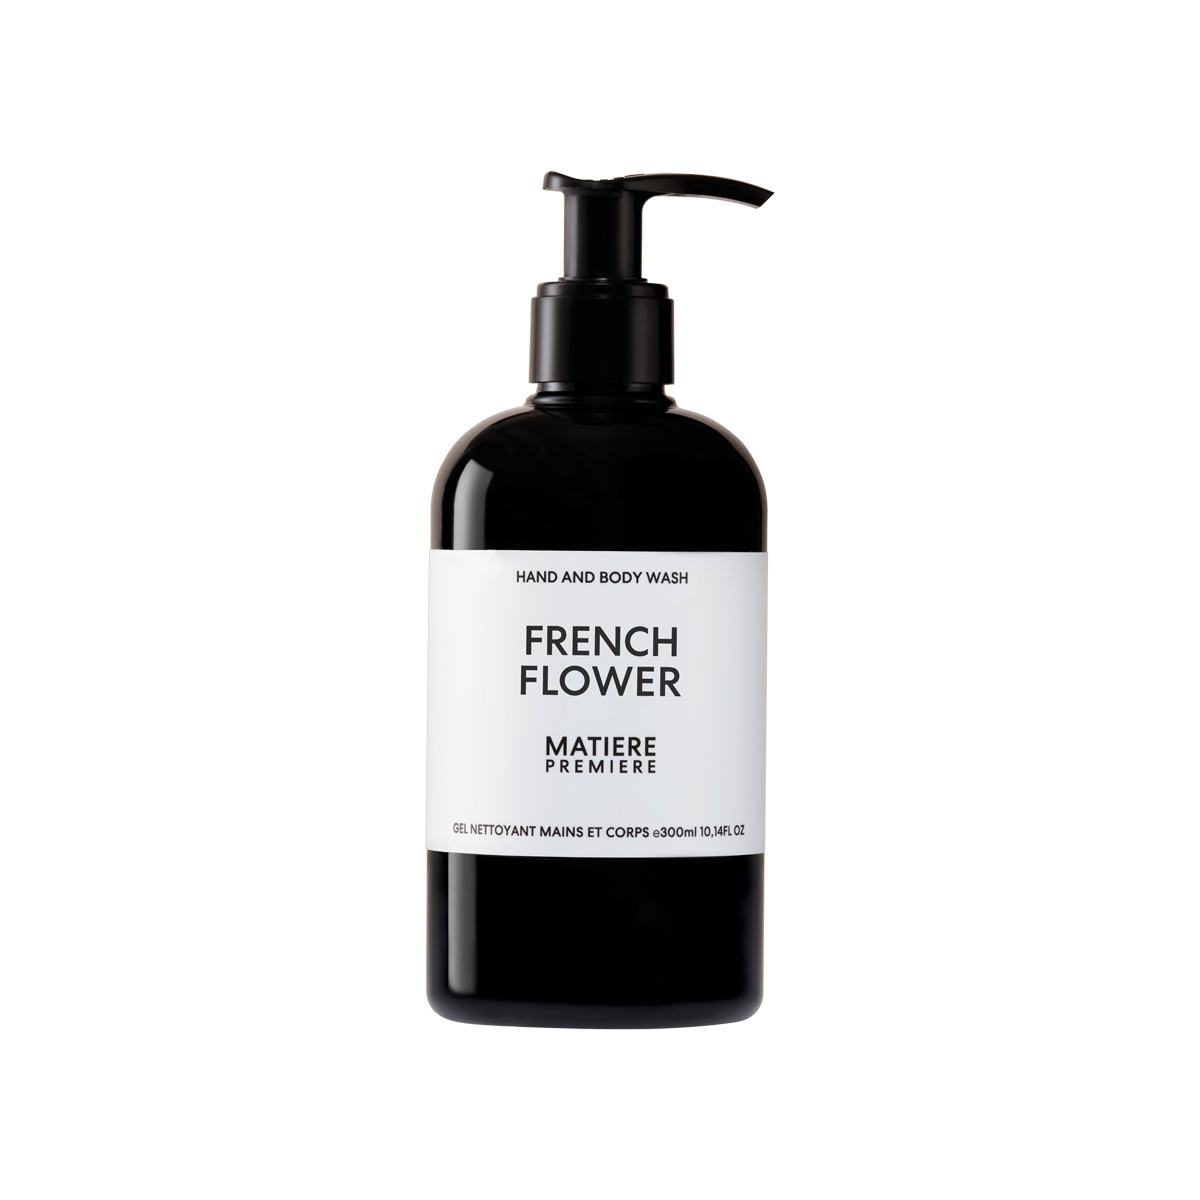 Matiere Premiere - Hand and body wash French Flower